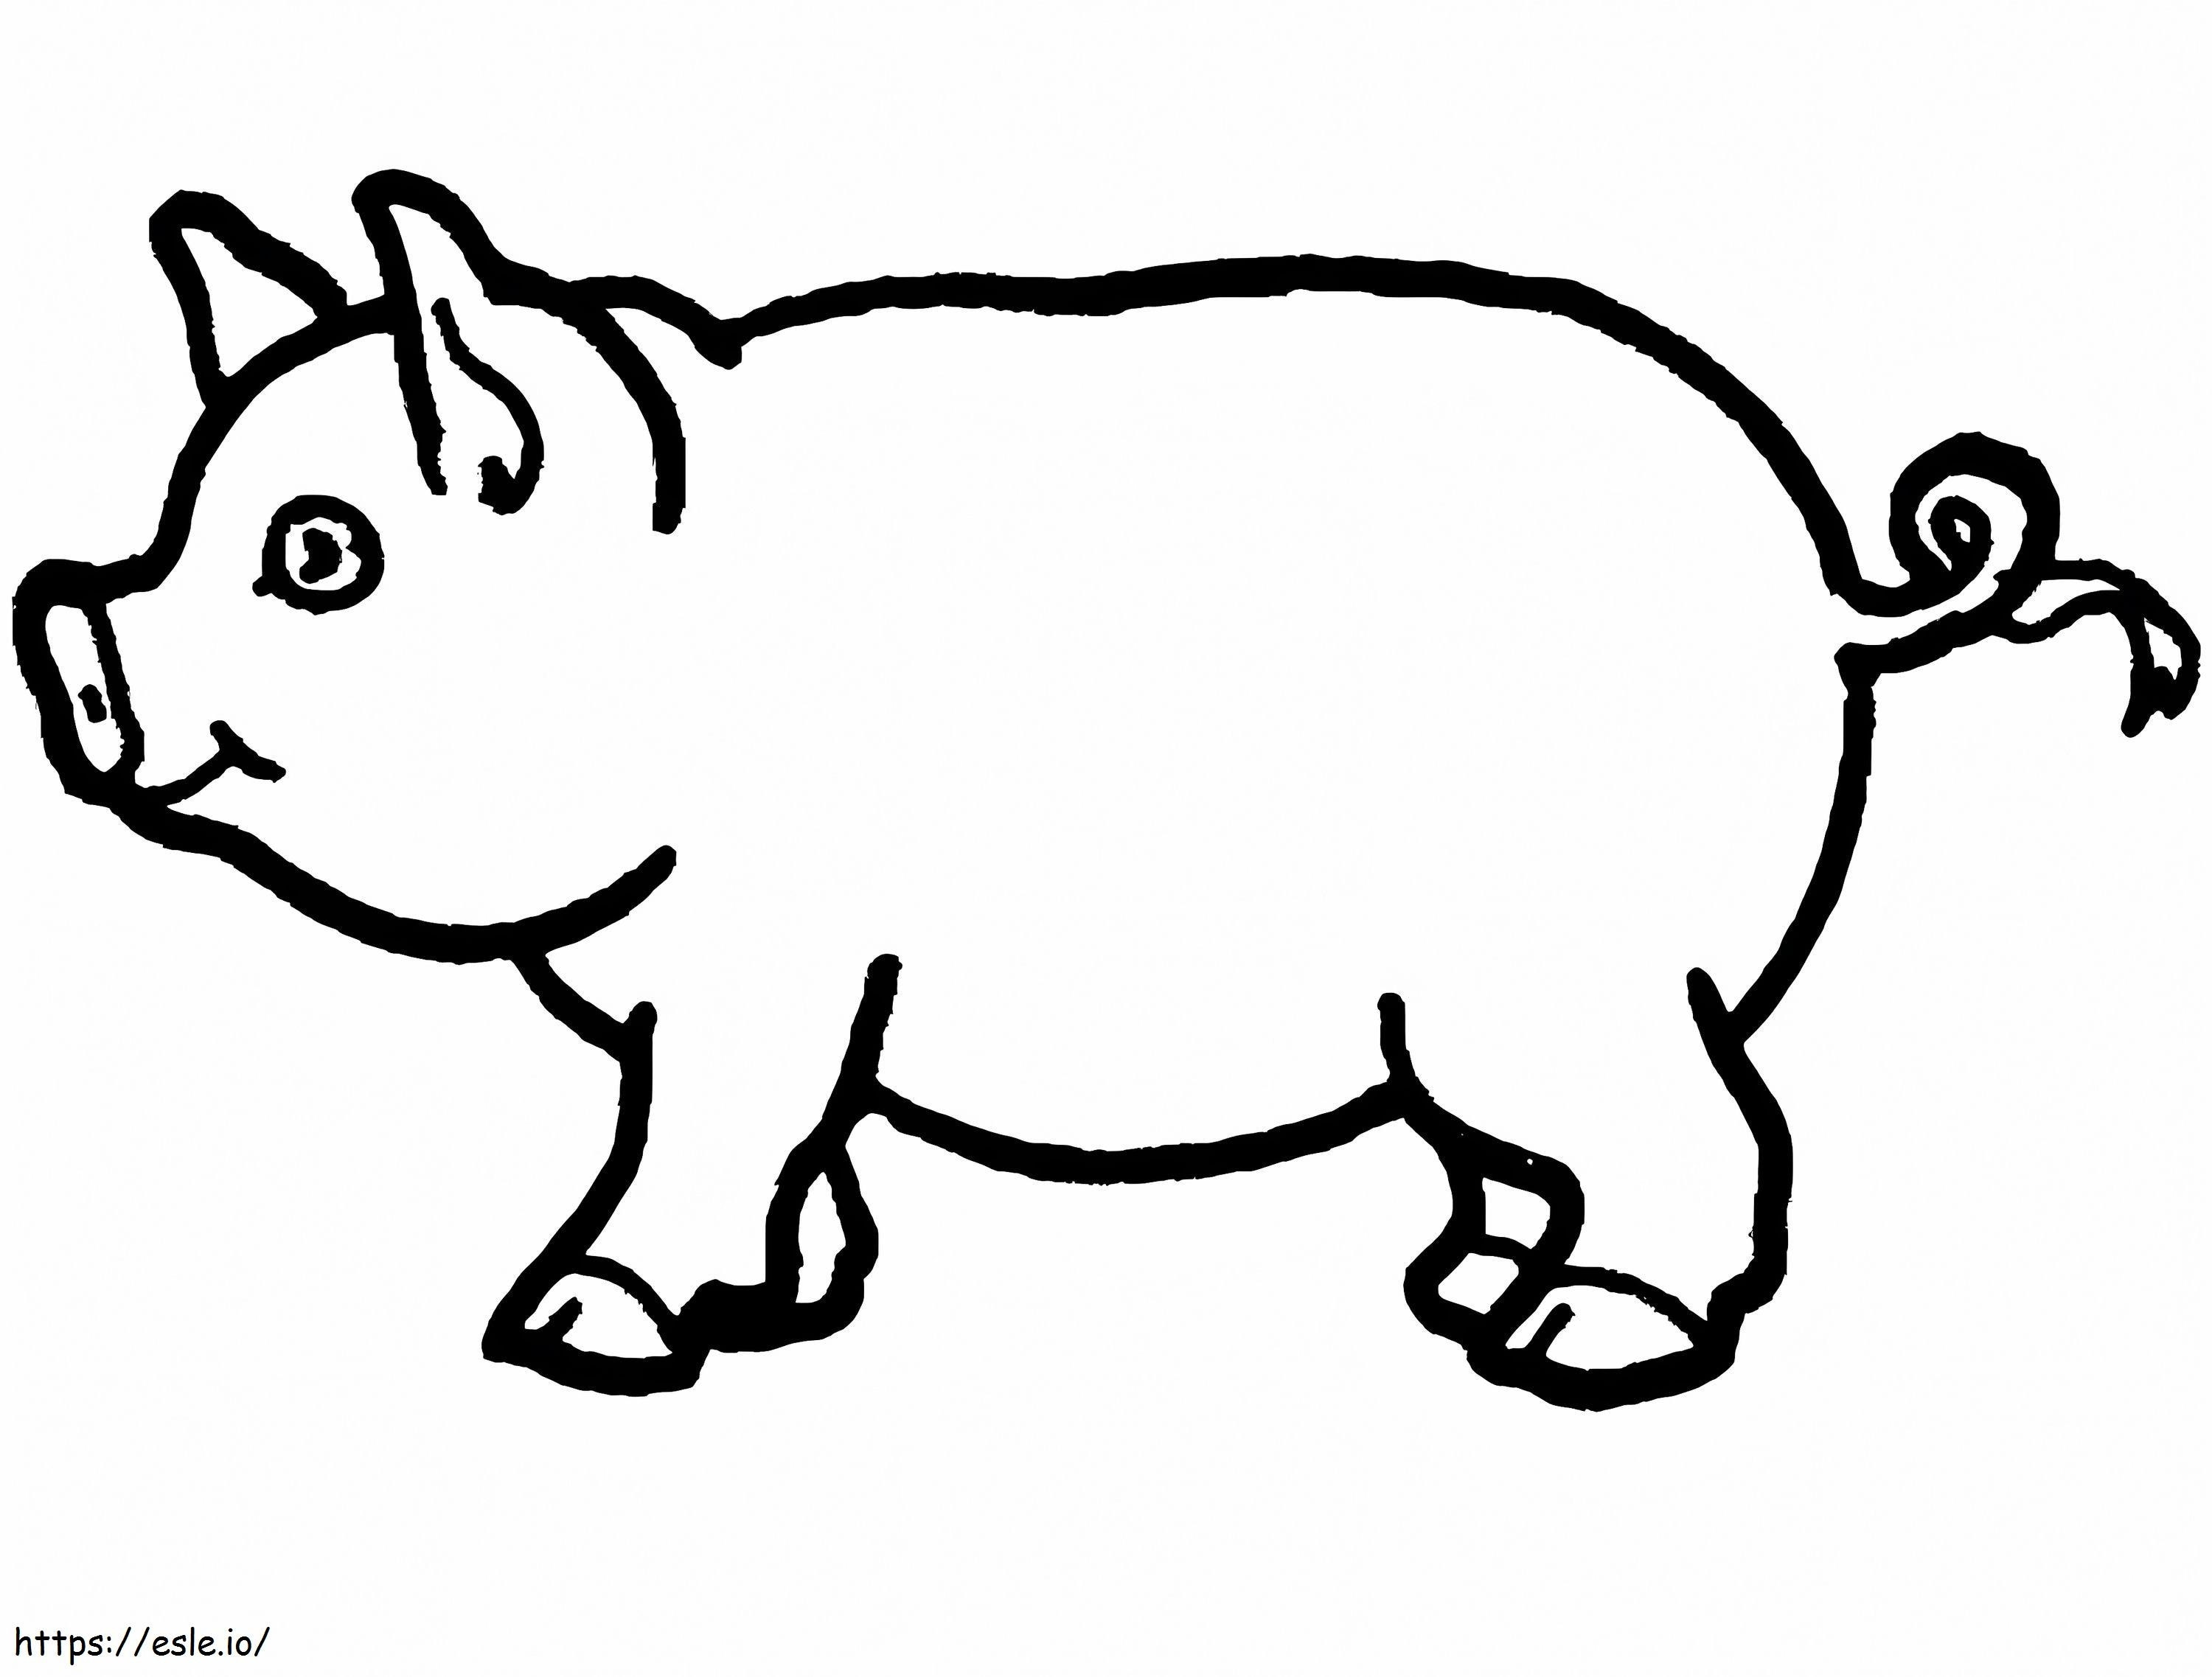 Small Pig coloring page